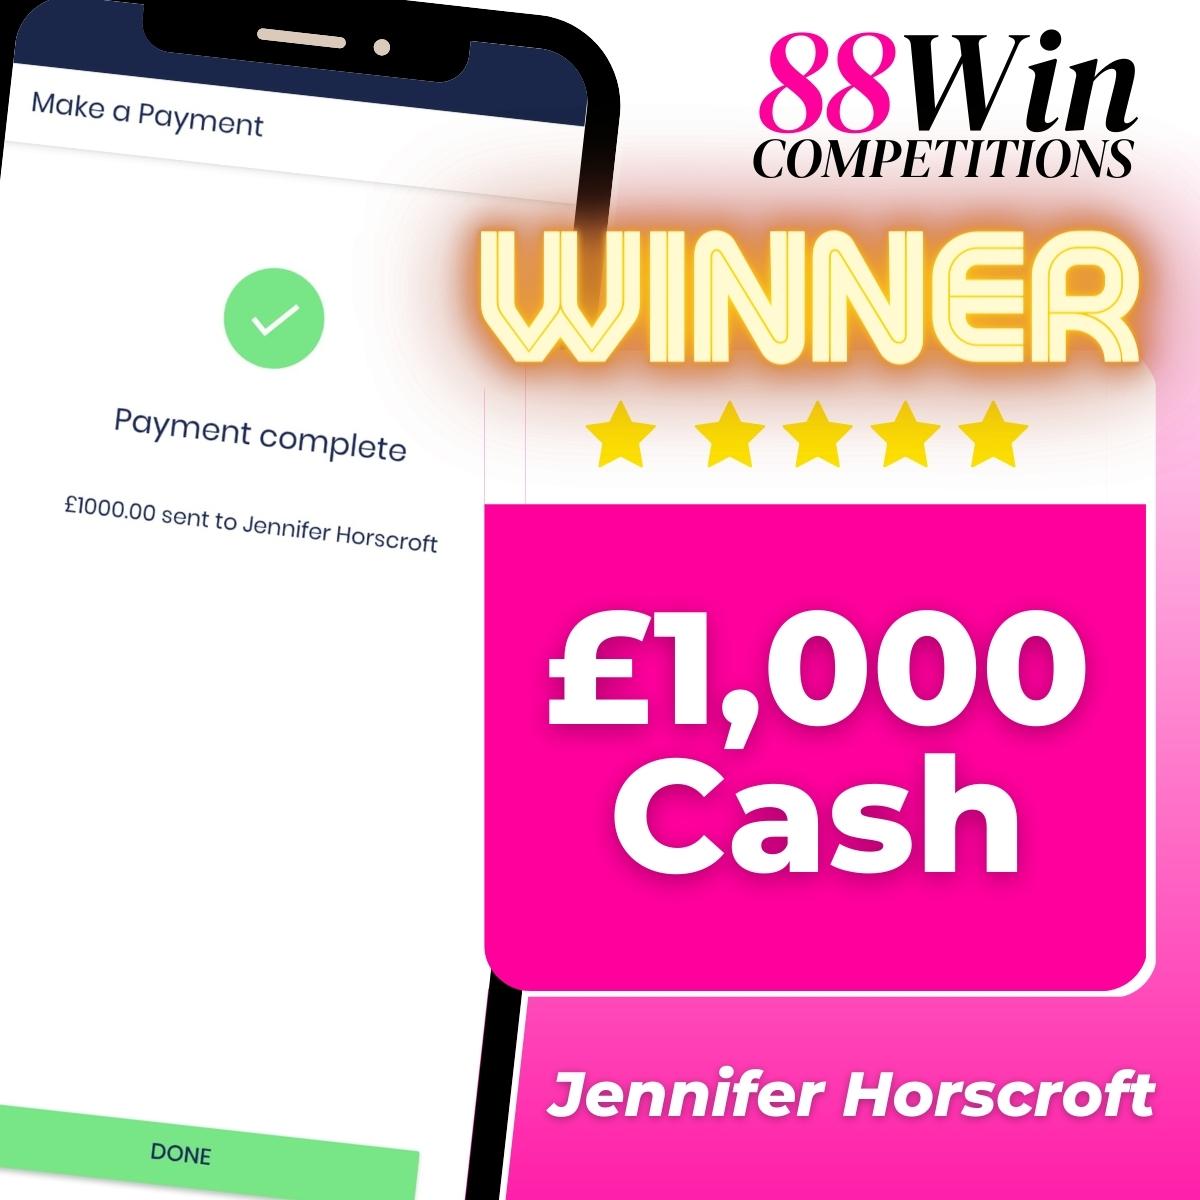 88Win Competitions Winner Photo £1,000 Cash